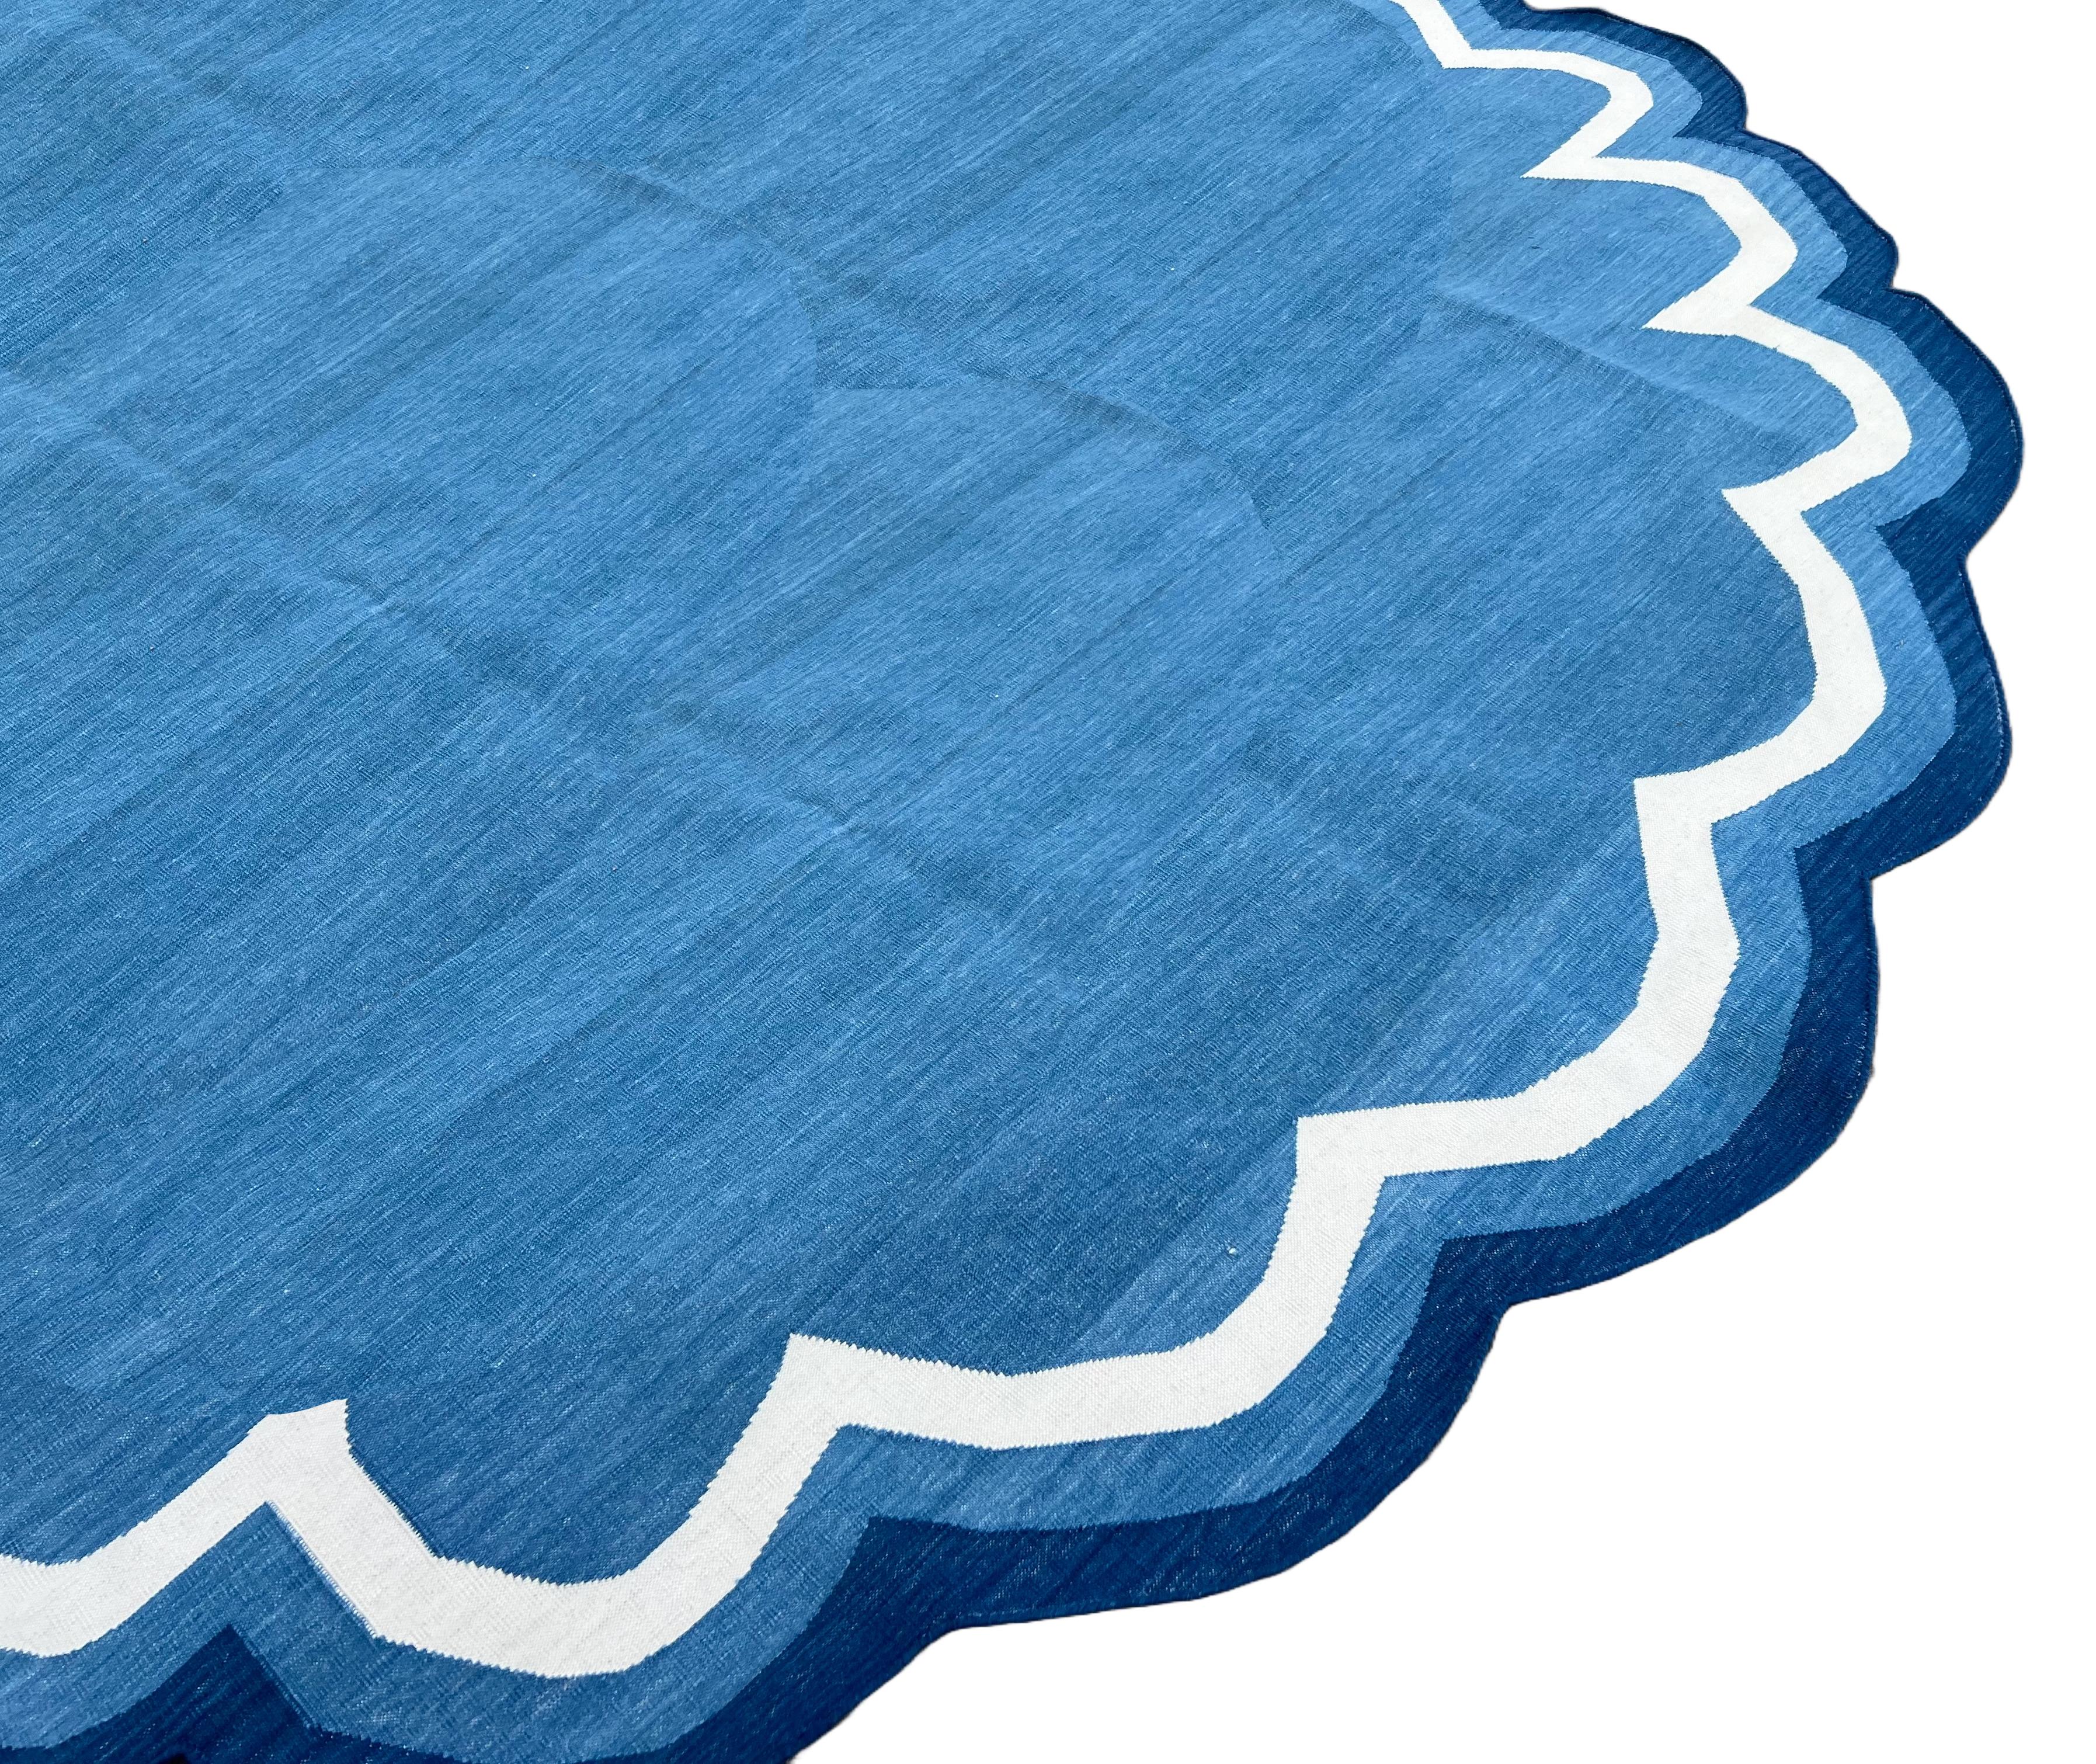 Mid-Century Modern Handmade Cotton Area Flat Weave Rug, Blue & White Round Scalloped Indian Dhurrie For Sale